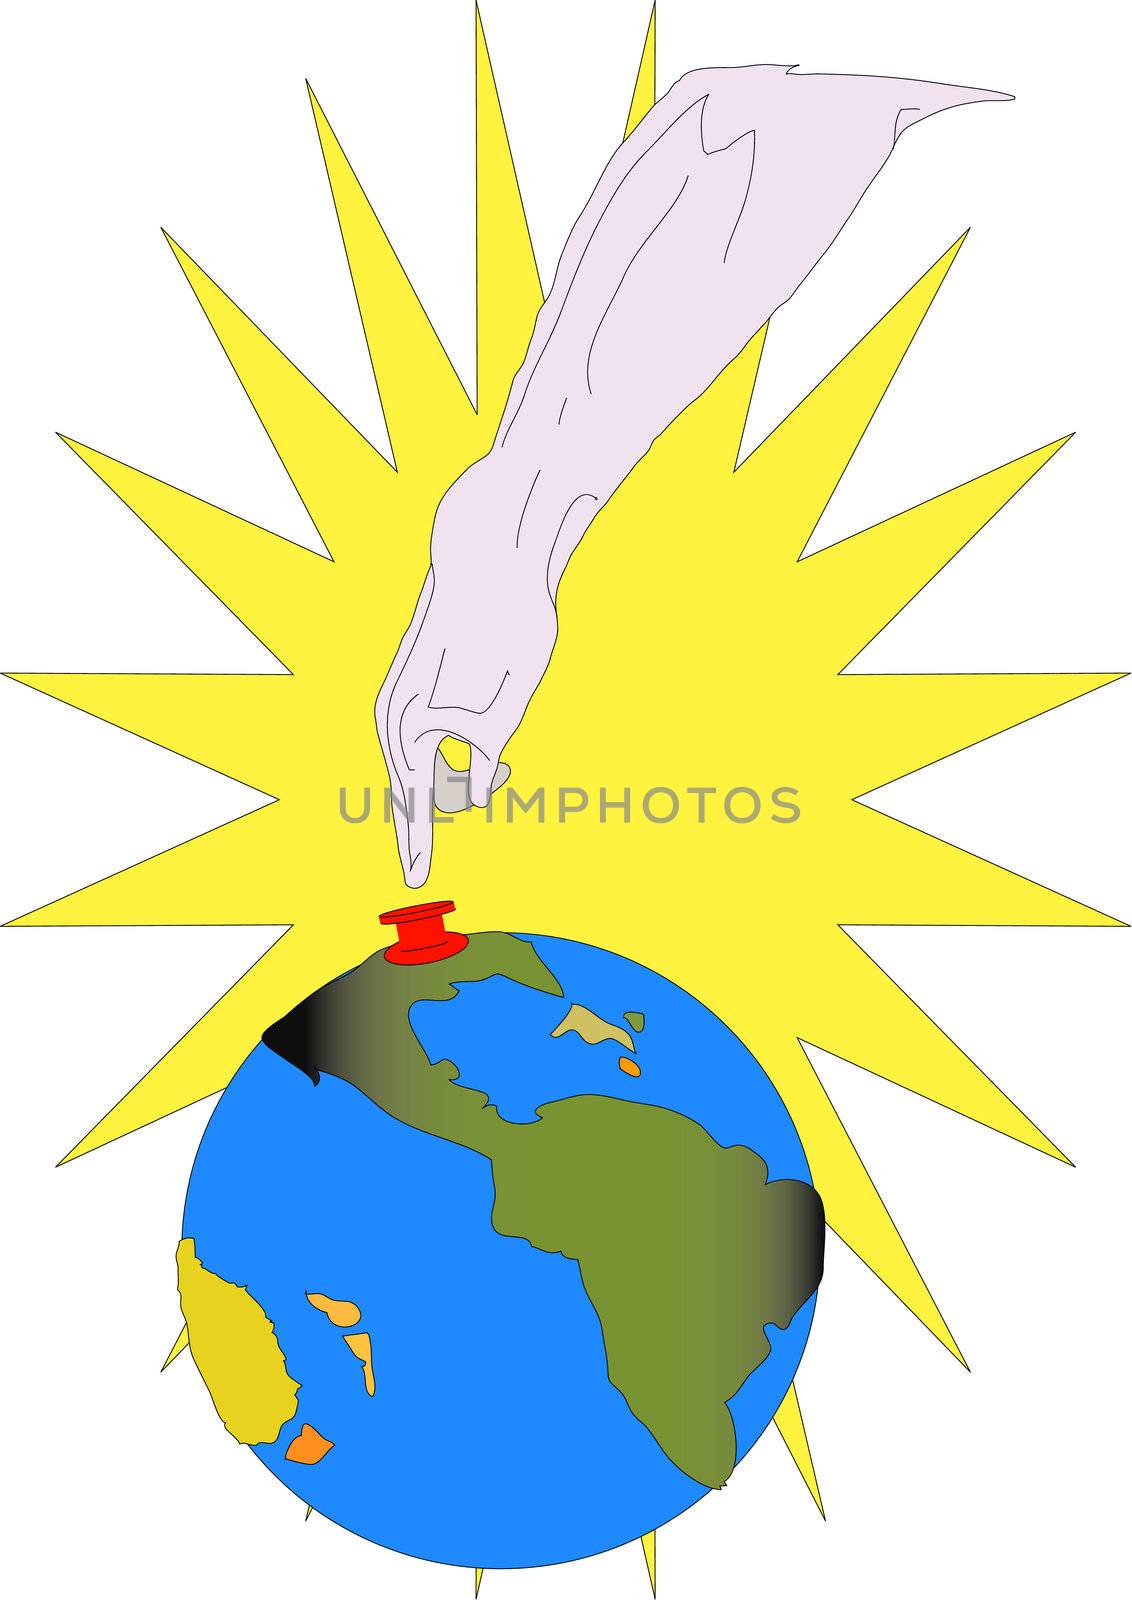 A hand reaches down from above to press a red button on the world.  Illustration with yellow starburst pattern in background.